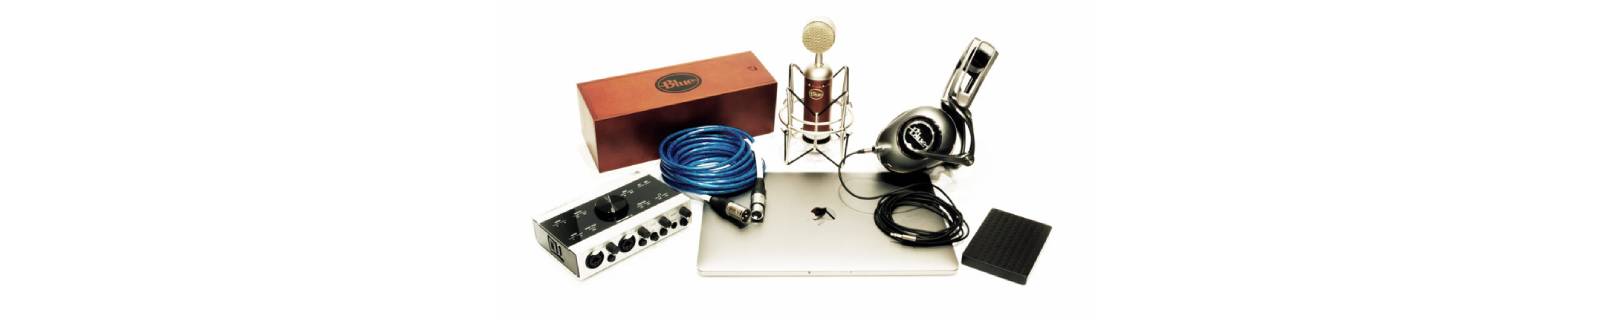 Laptop and other audio recording tools.